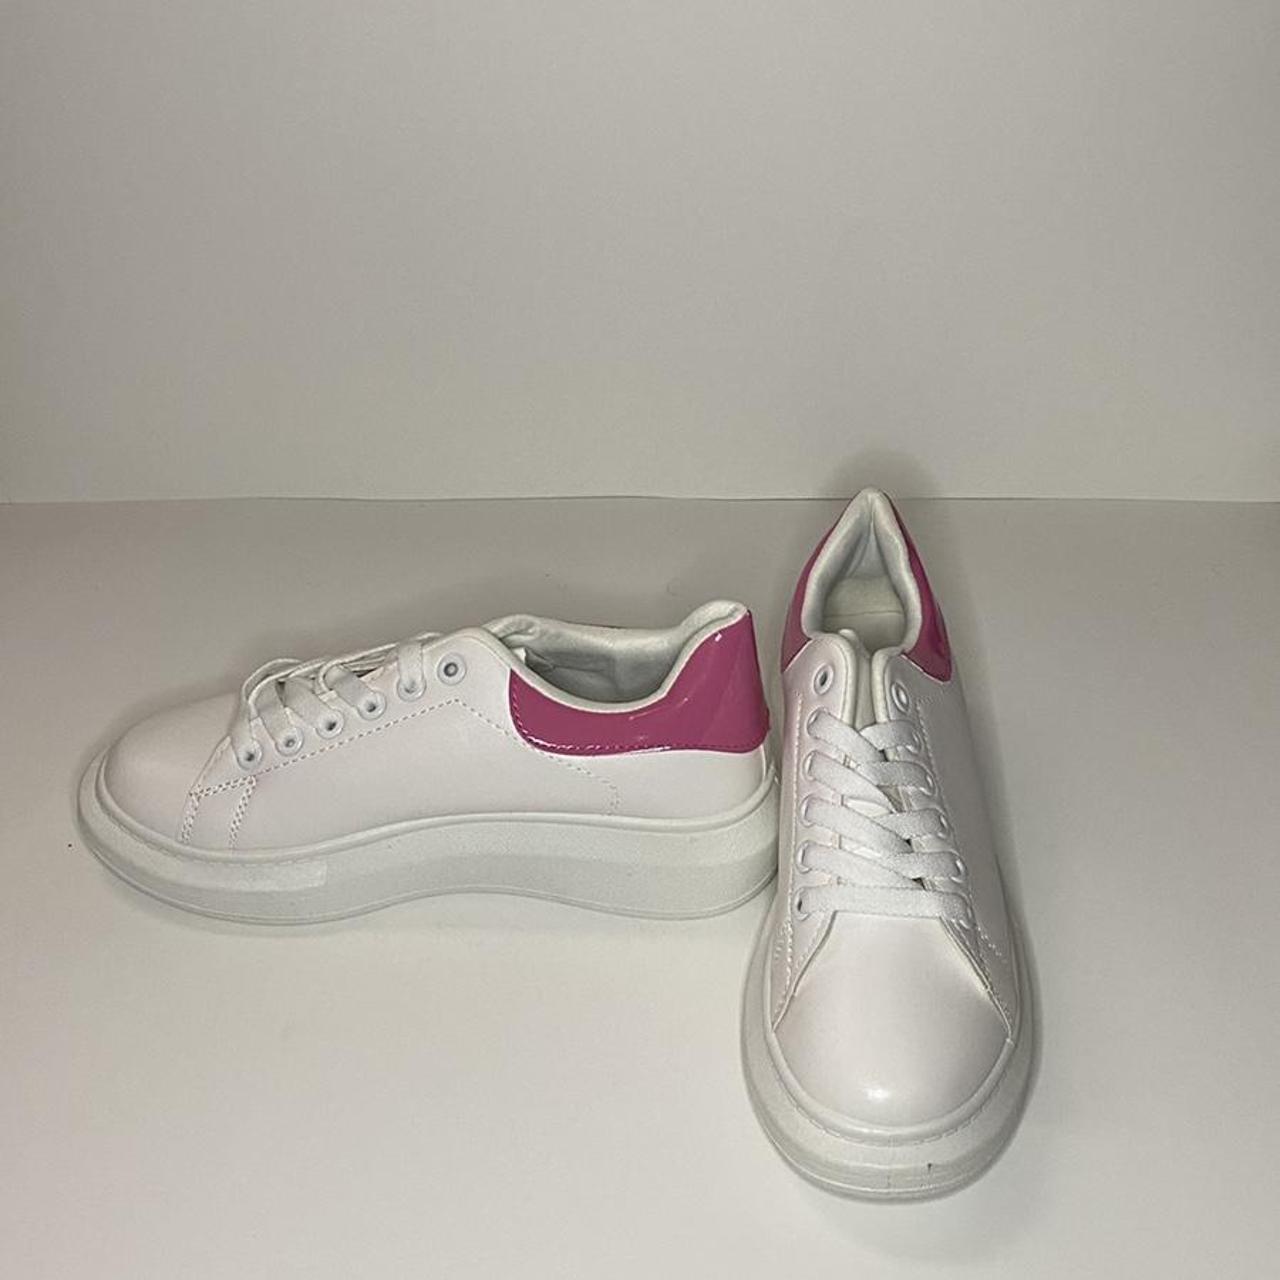 EGO Women's Pink and White Trainers